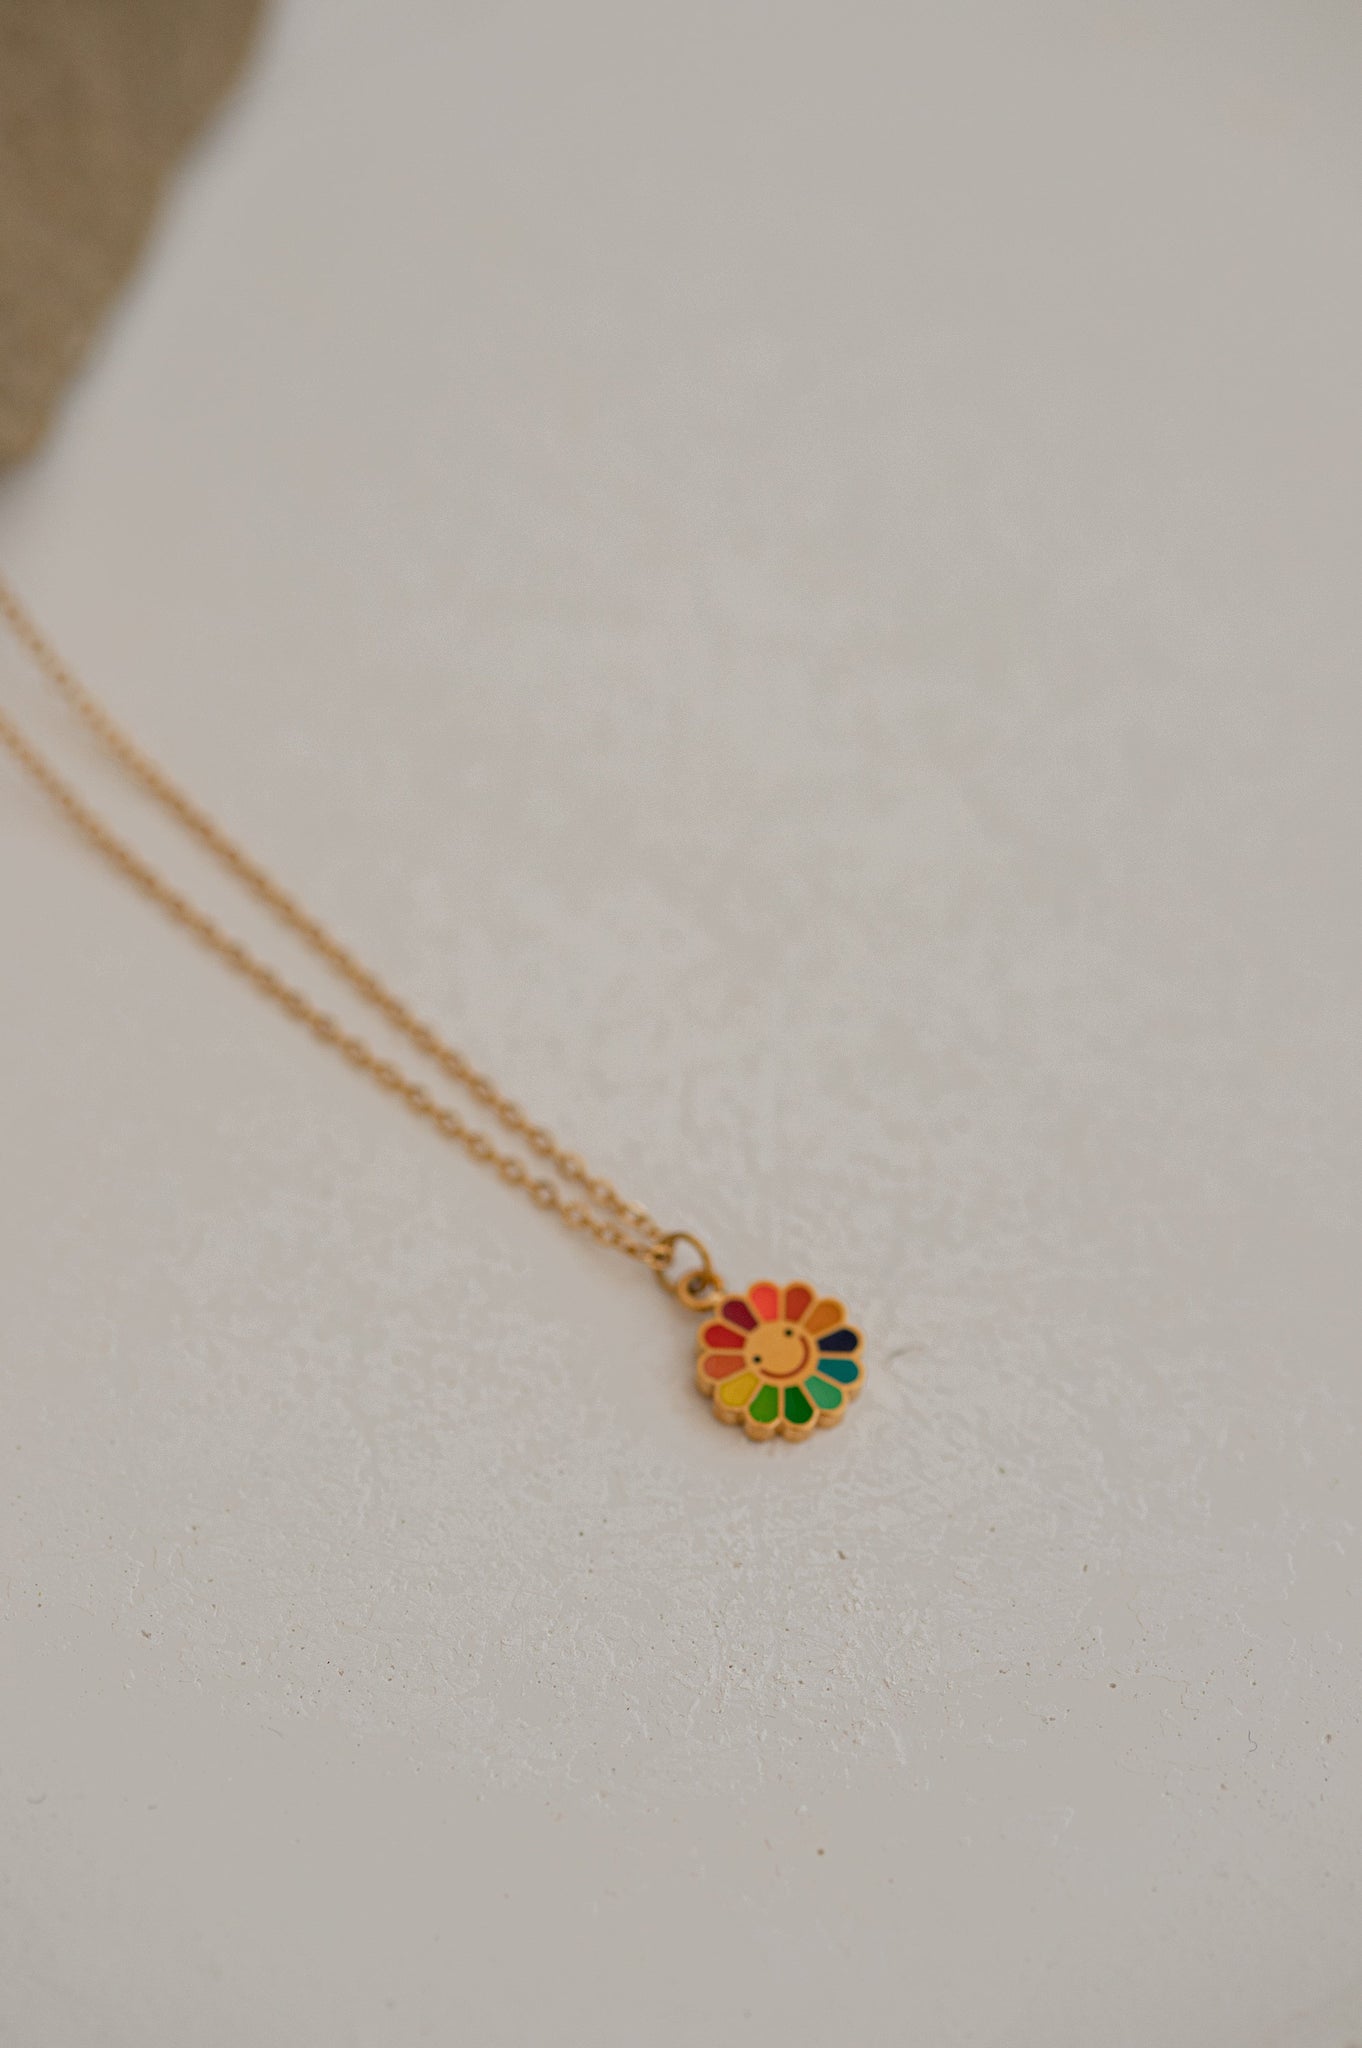 Colorful Sunflower Necklace, 18K Gold Necklace, Gift For Her, Laughing Sunflower Charm, Minimalist Necklace, Summer Jewelry, Dainty Necklace